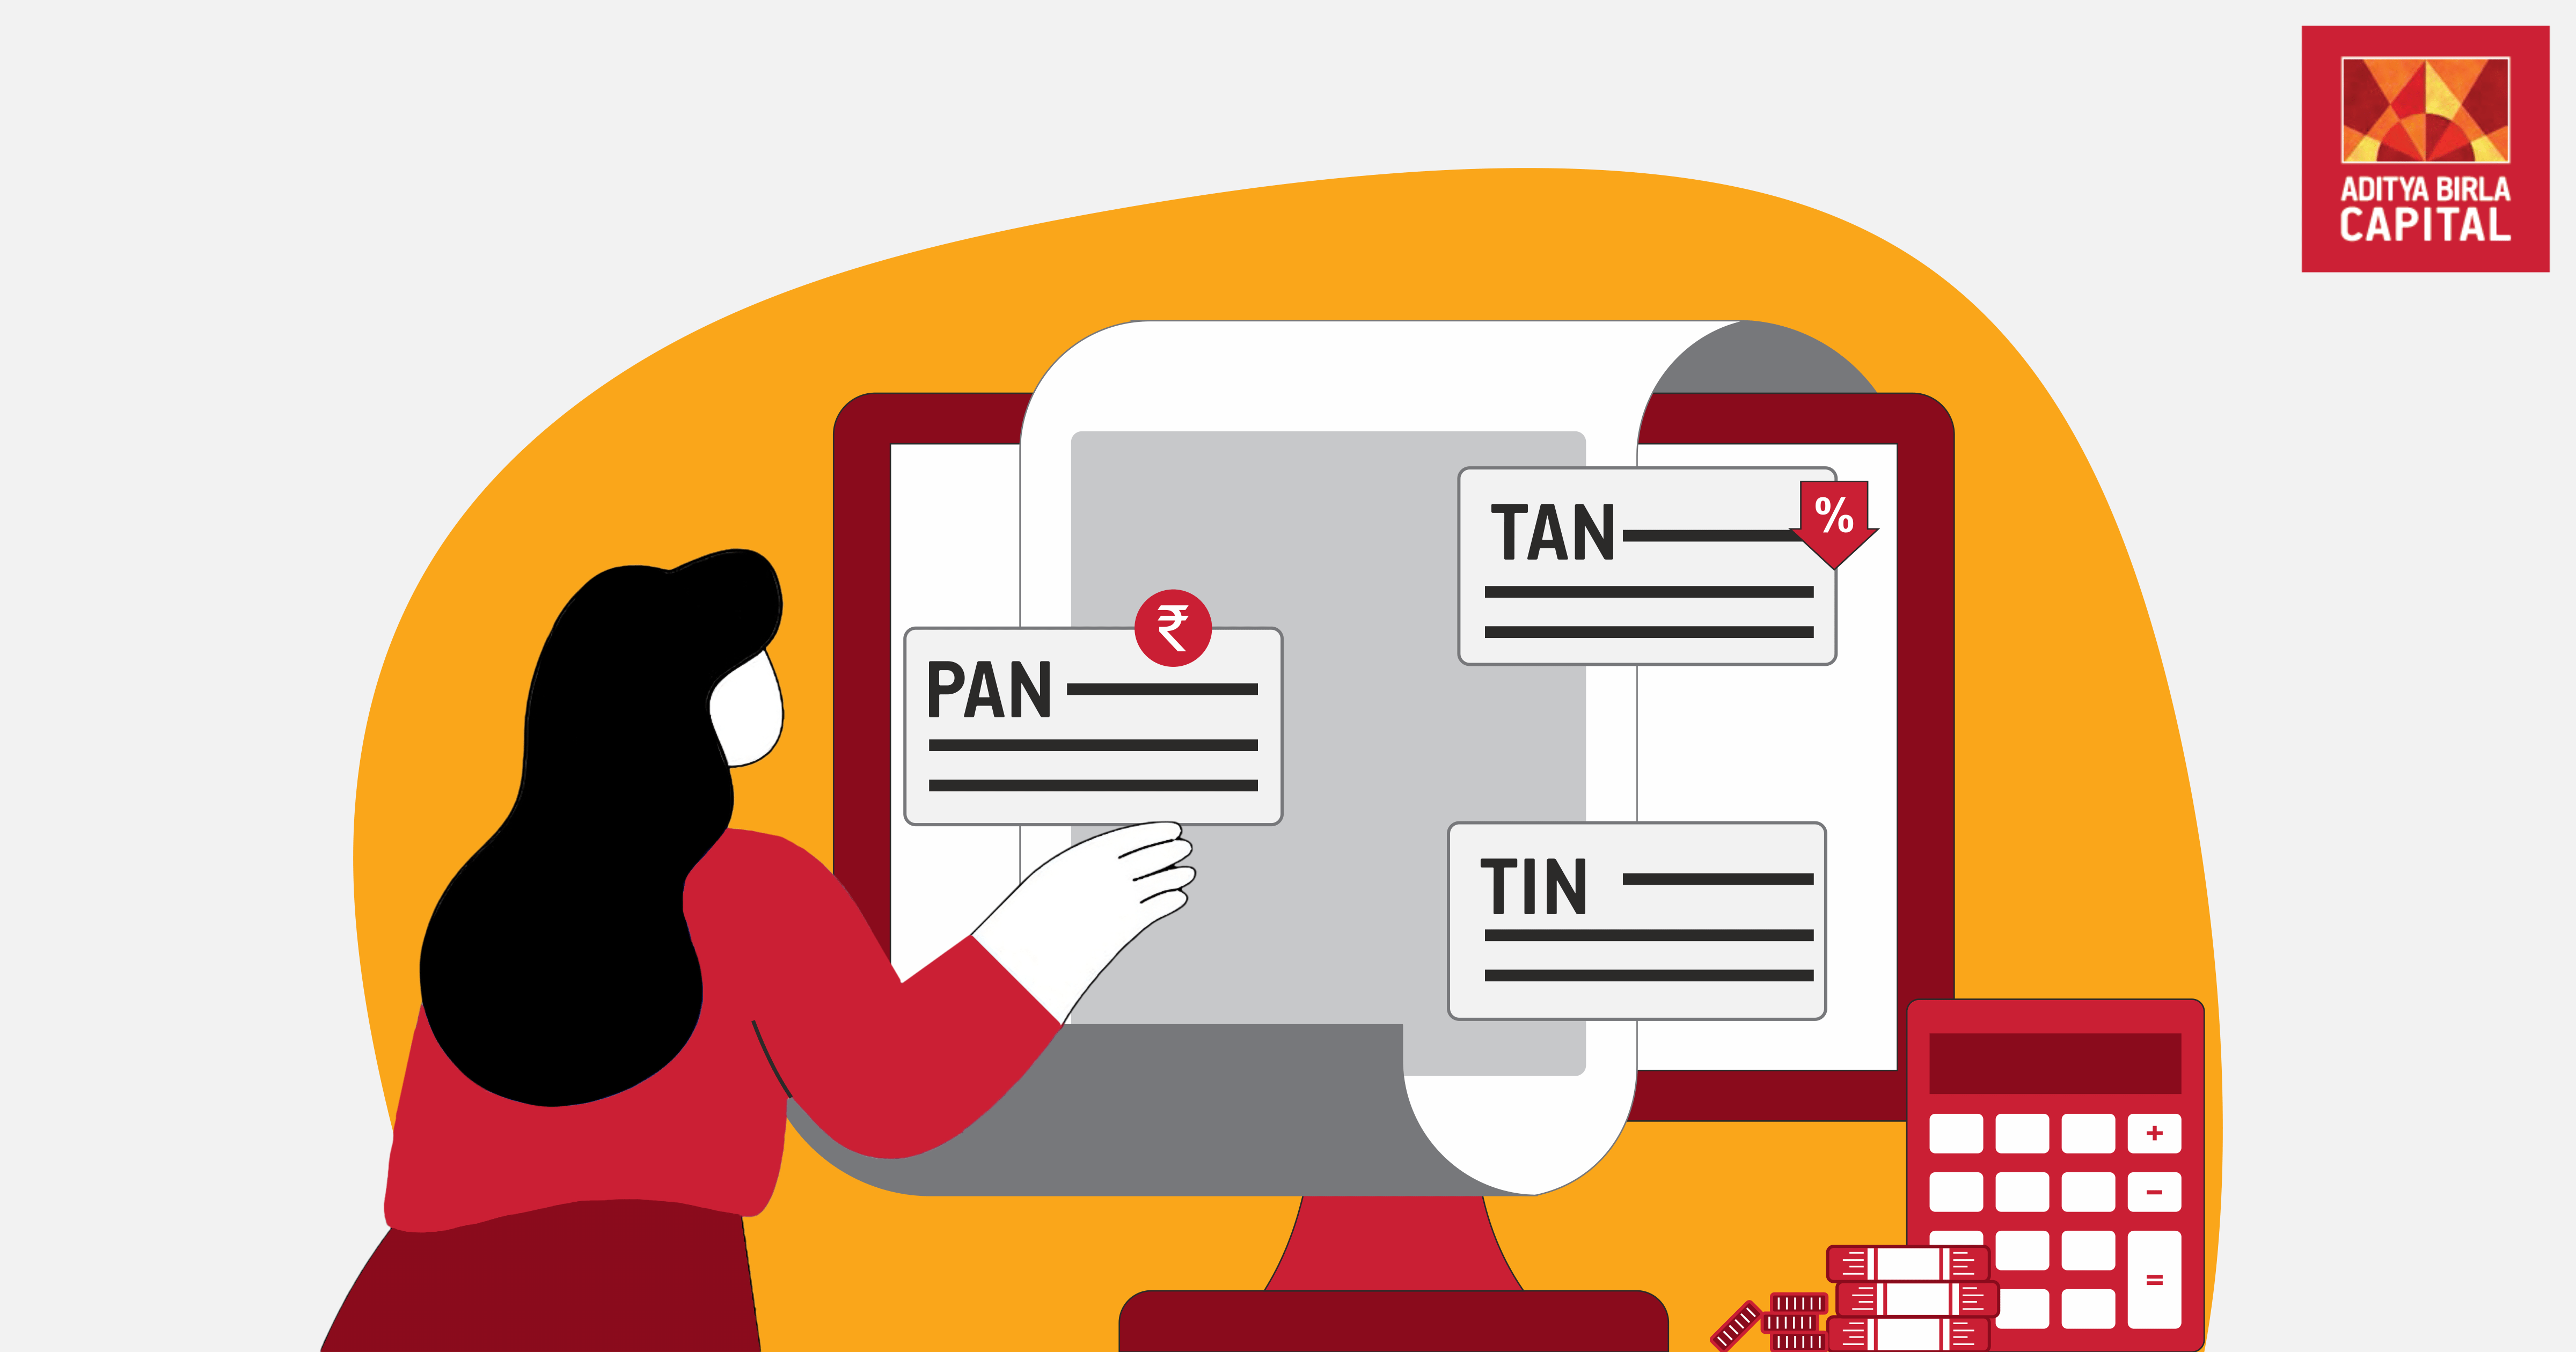 What is the difference between TAN, PAN and TIN?